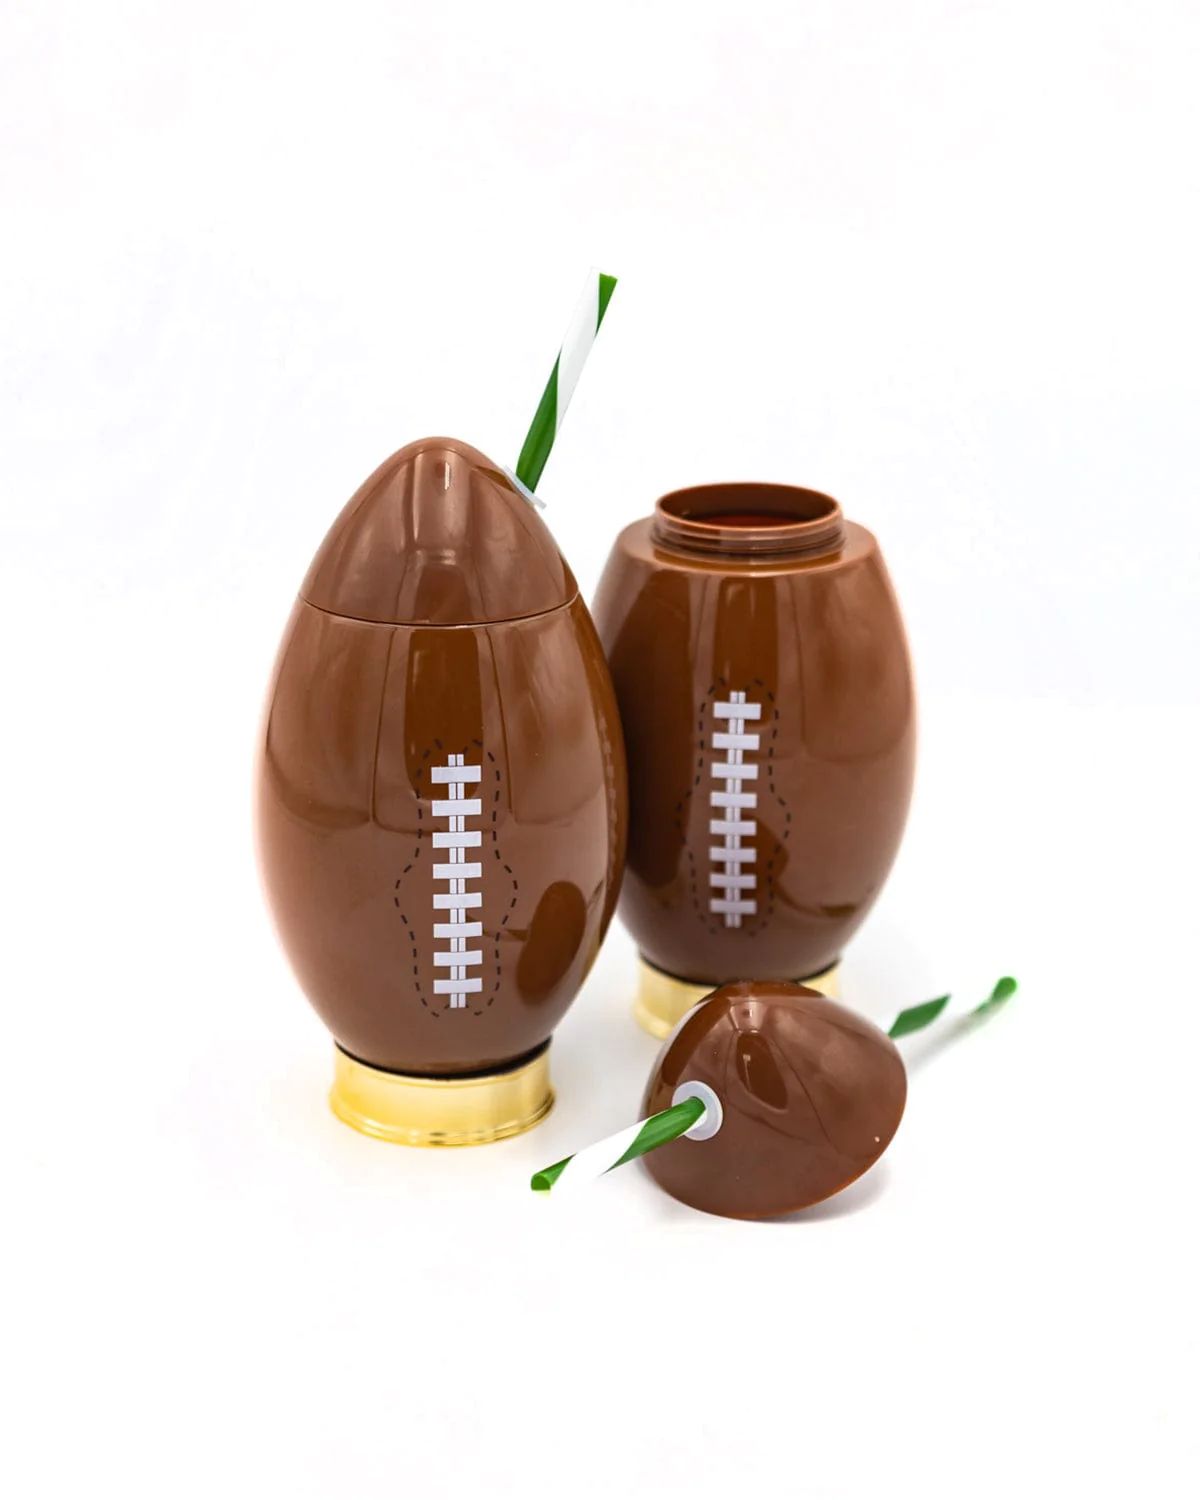 Down, Set, Fun Football Novelty Sipper | Packed Party